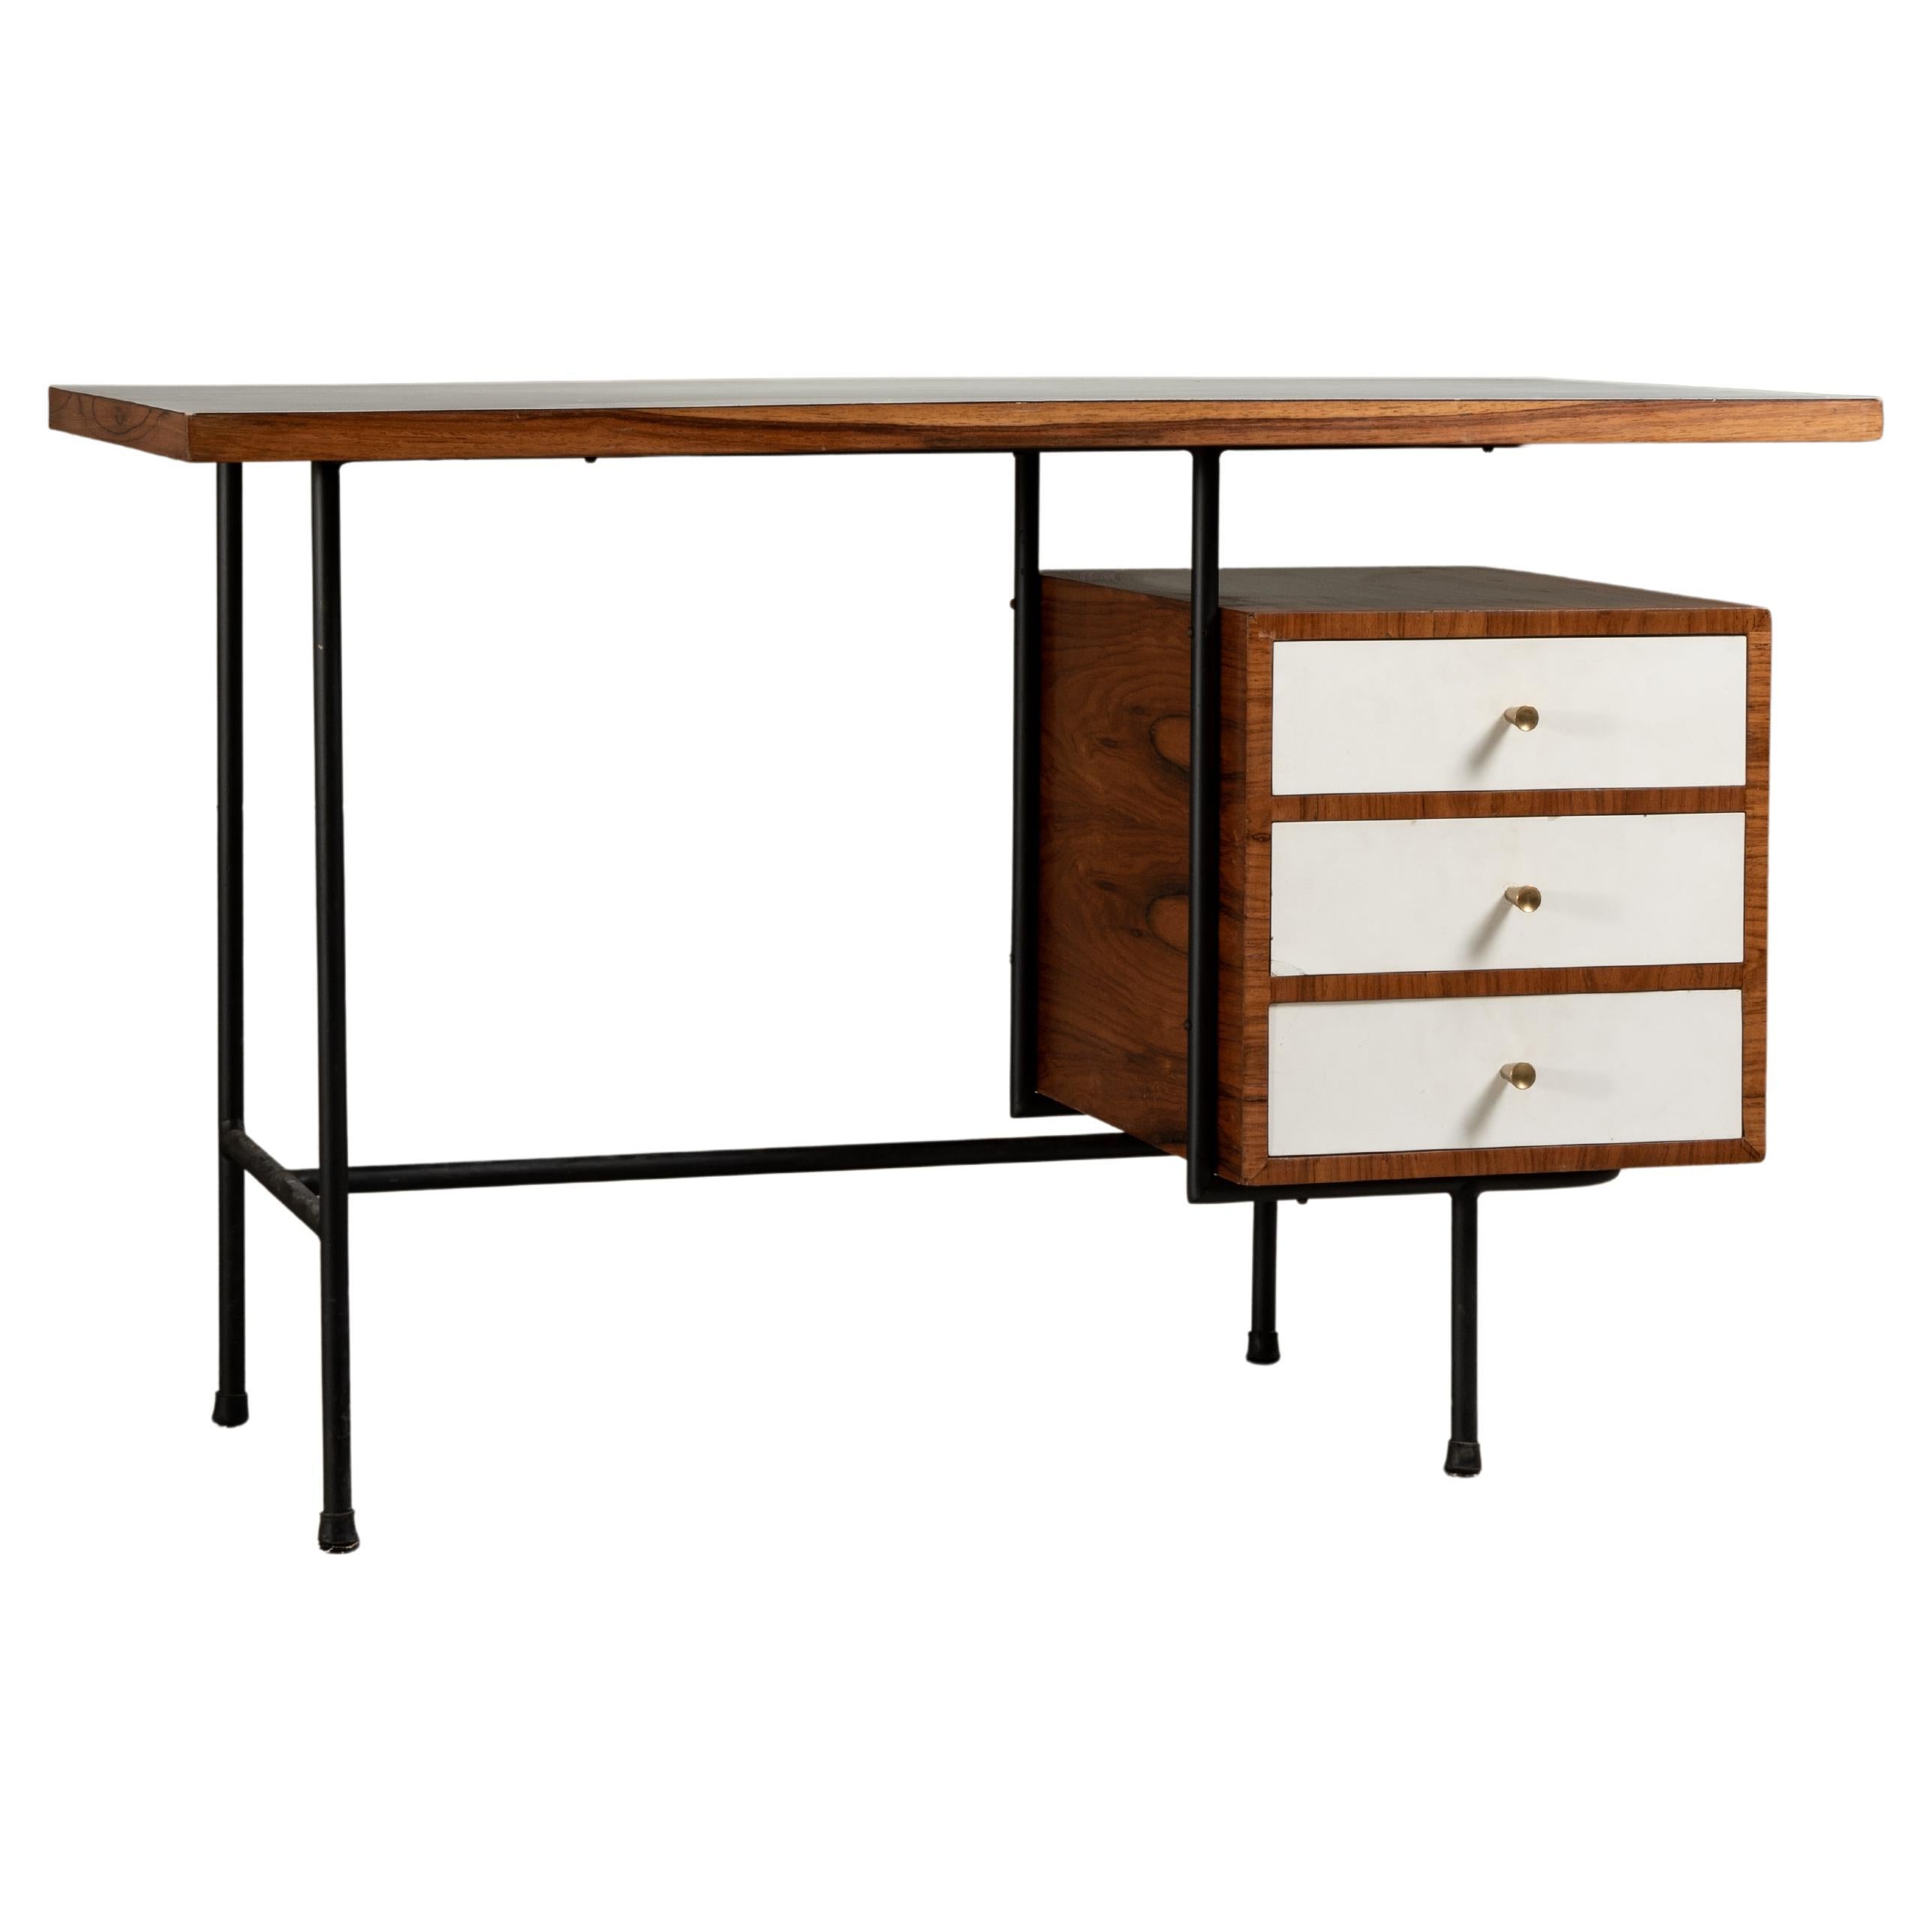 Architectural Desk in Iron and Wood, by Unilabor, Brazilian Mid-Century Modern   For Sale